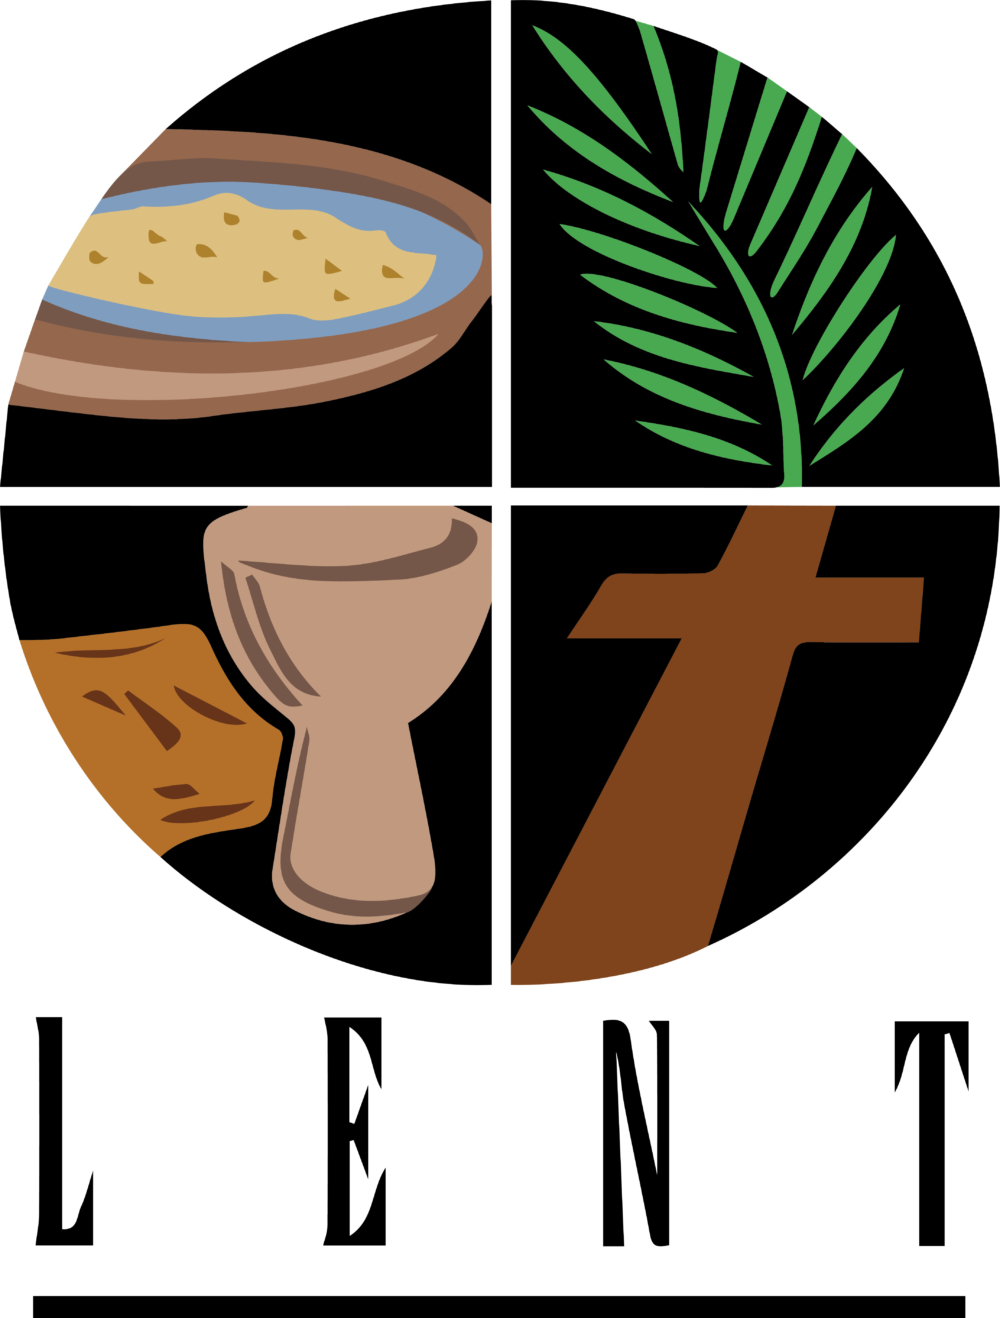 1st Sunday in Lent Image